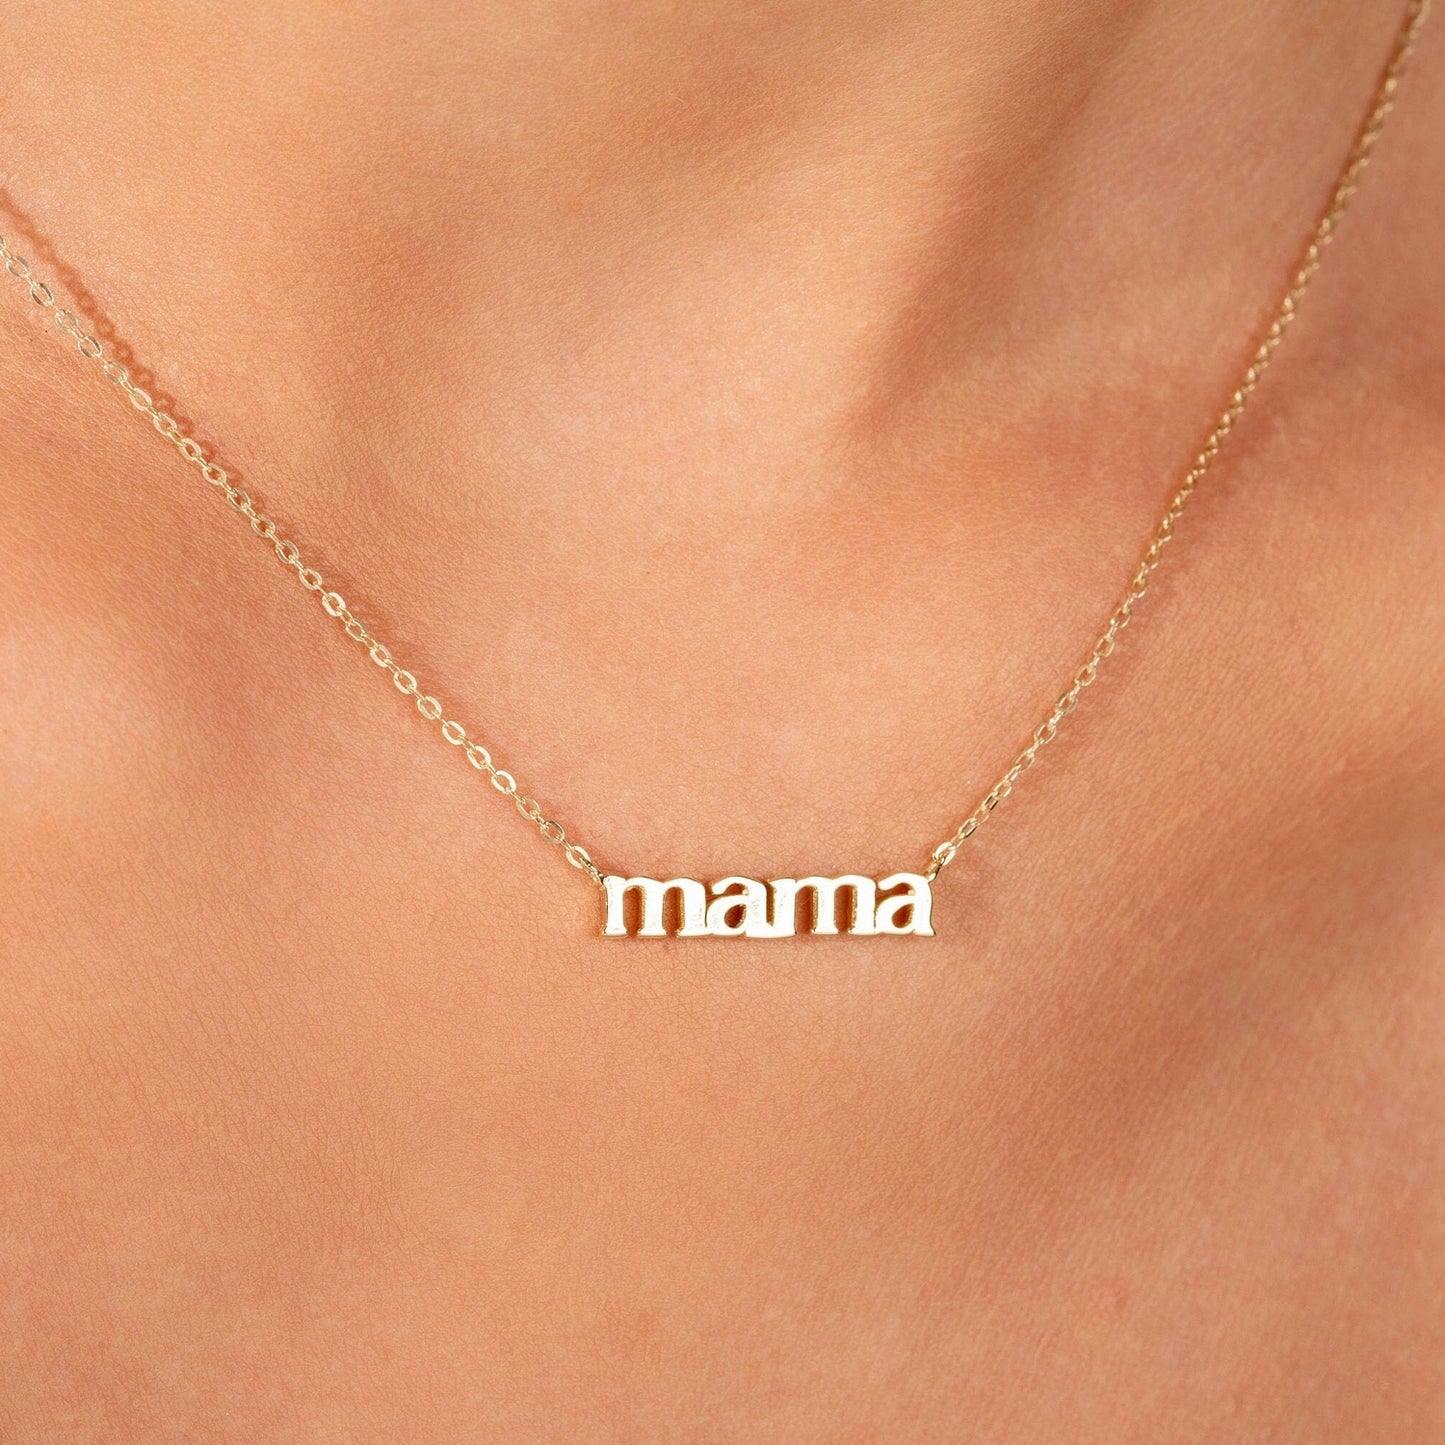 Mama Necklace, Mom Necklace, Delicate Mama Necklace, Love Necklace, Minimal Necklace for Moms, New Mom Gift